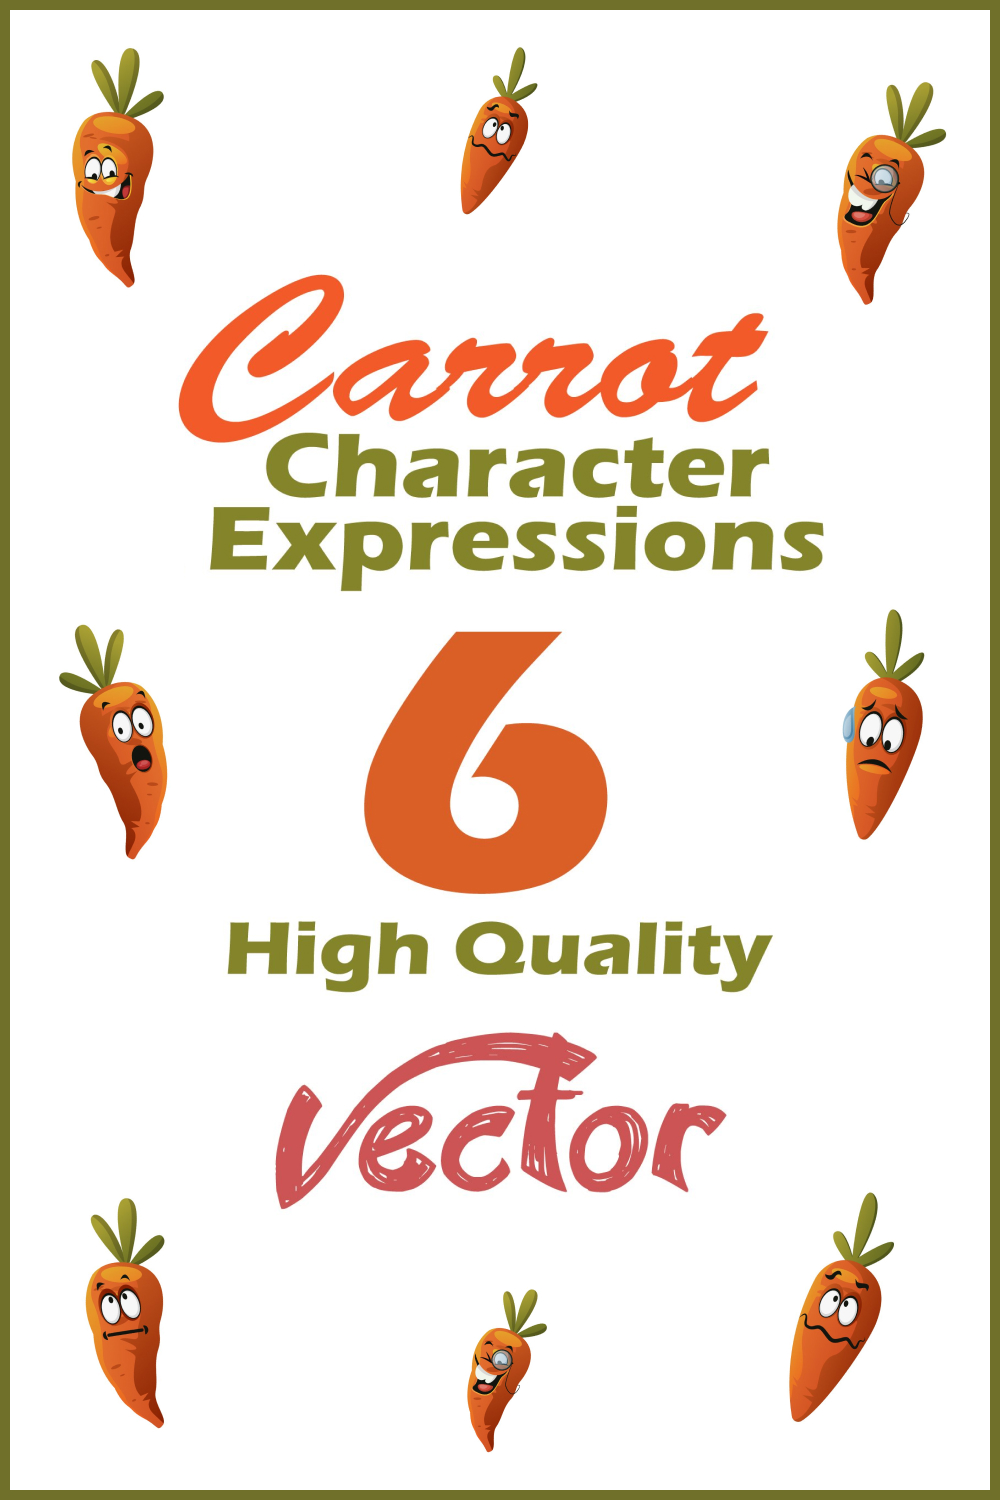 6x carrot character expressions illustrations 02 311